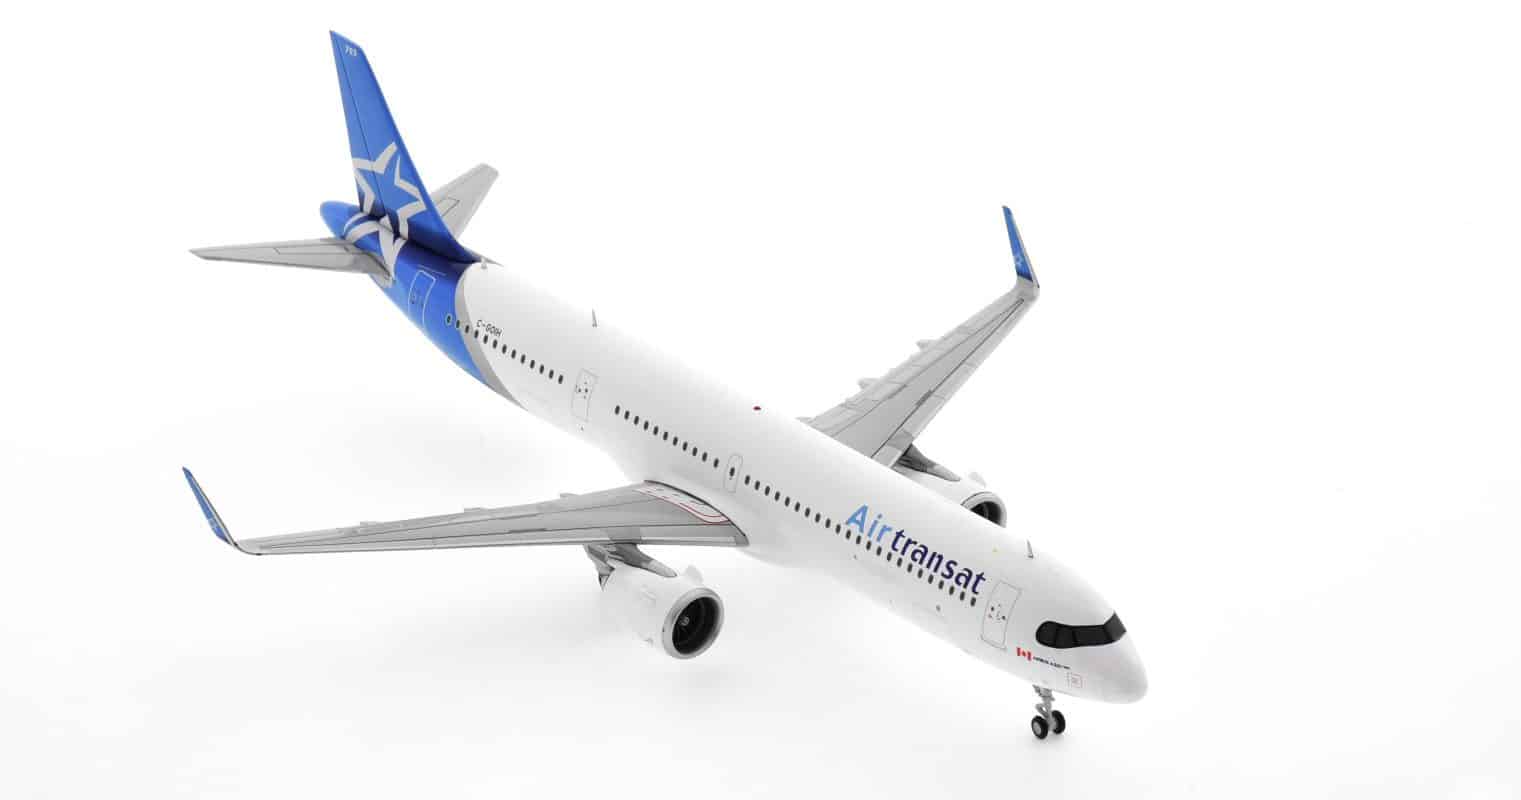 Front starboard side view of Gemini Jets G2TSC936 - 1/200 scale diecast model Airbus A321neo, registration C-GOIH in Air Transat's livery.